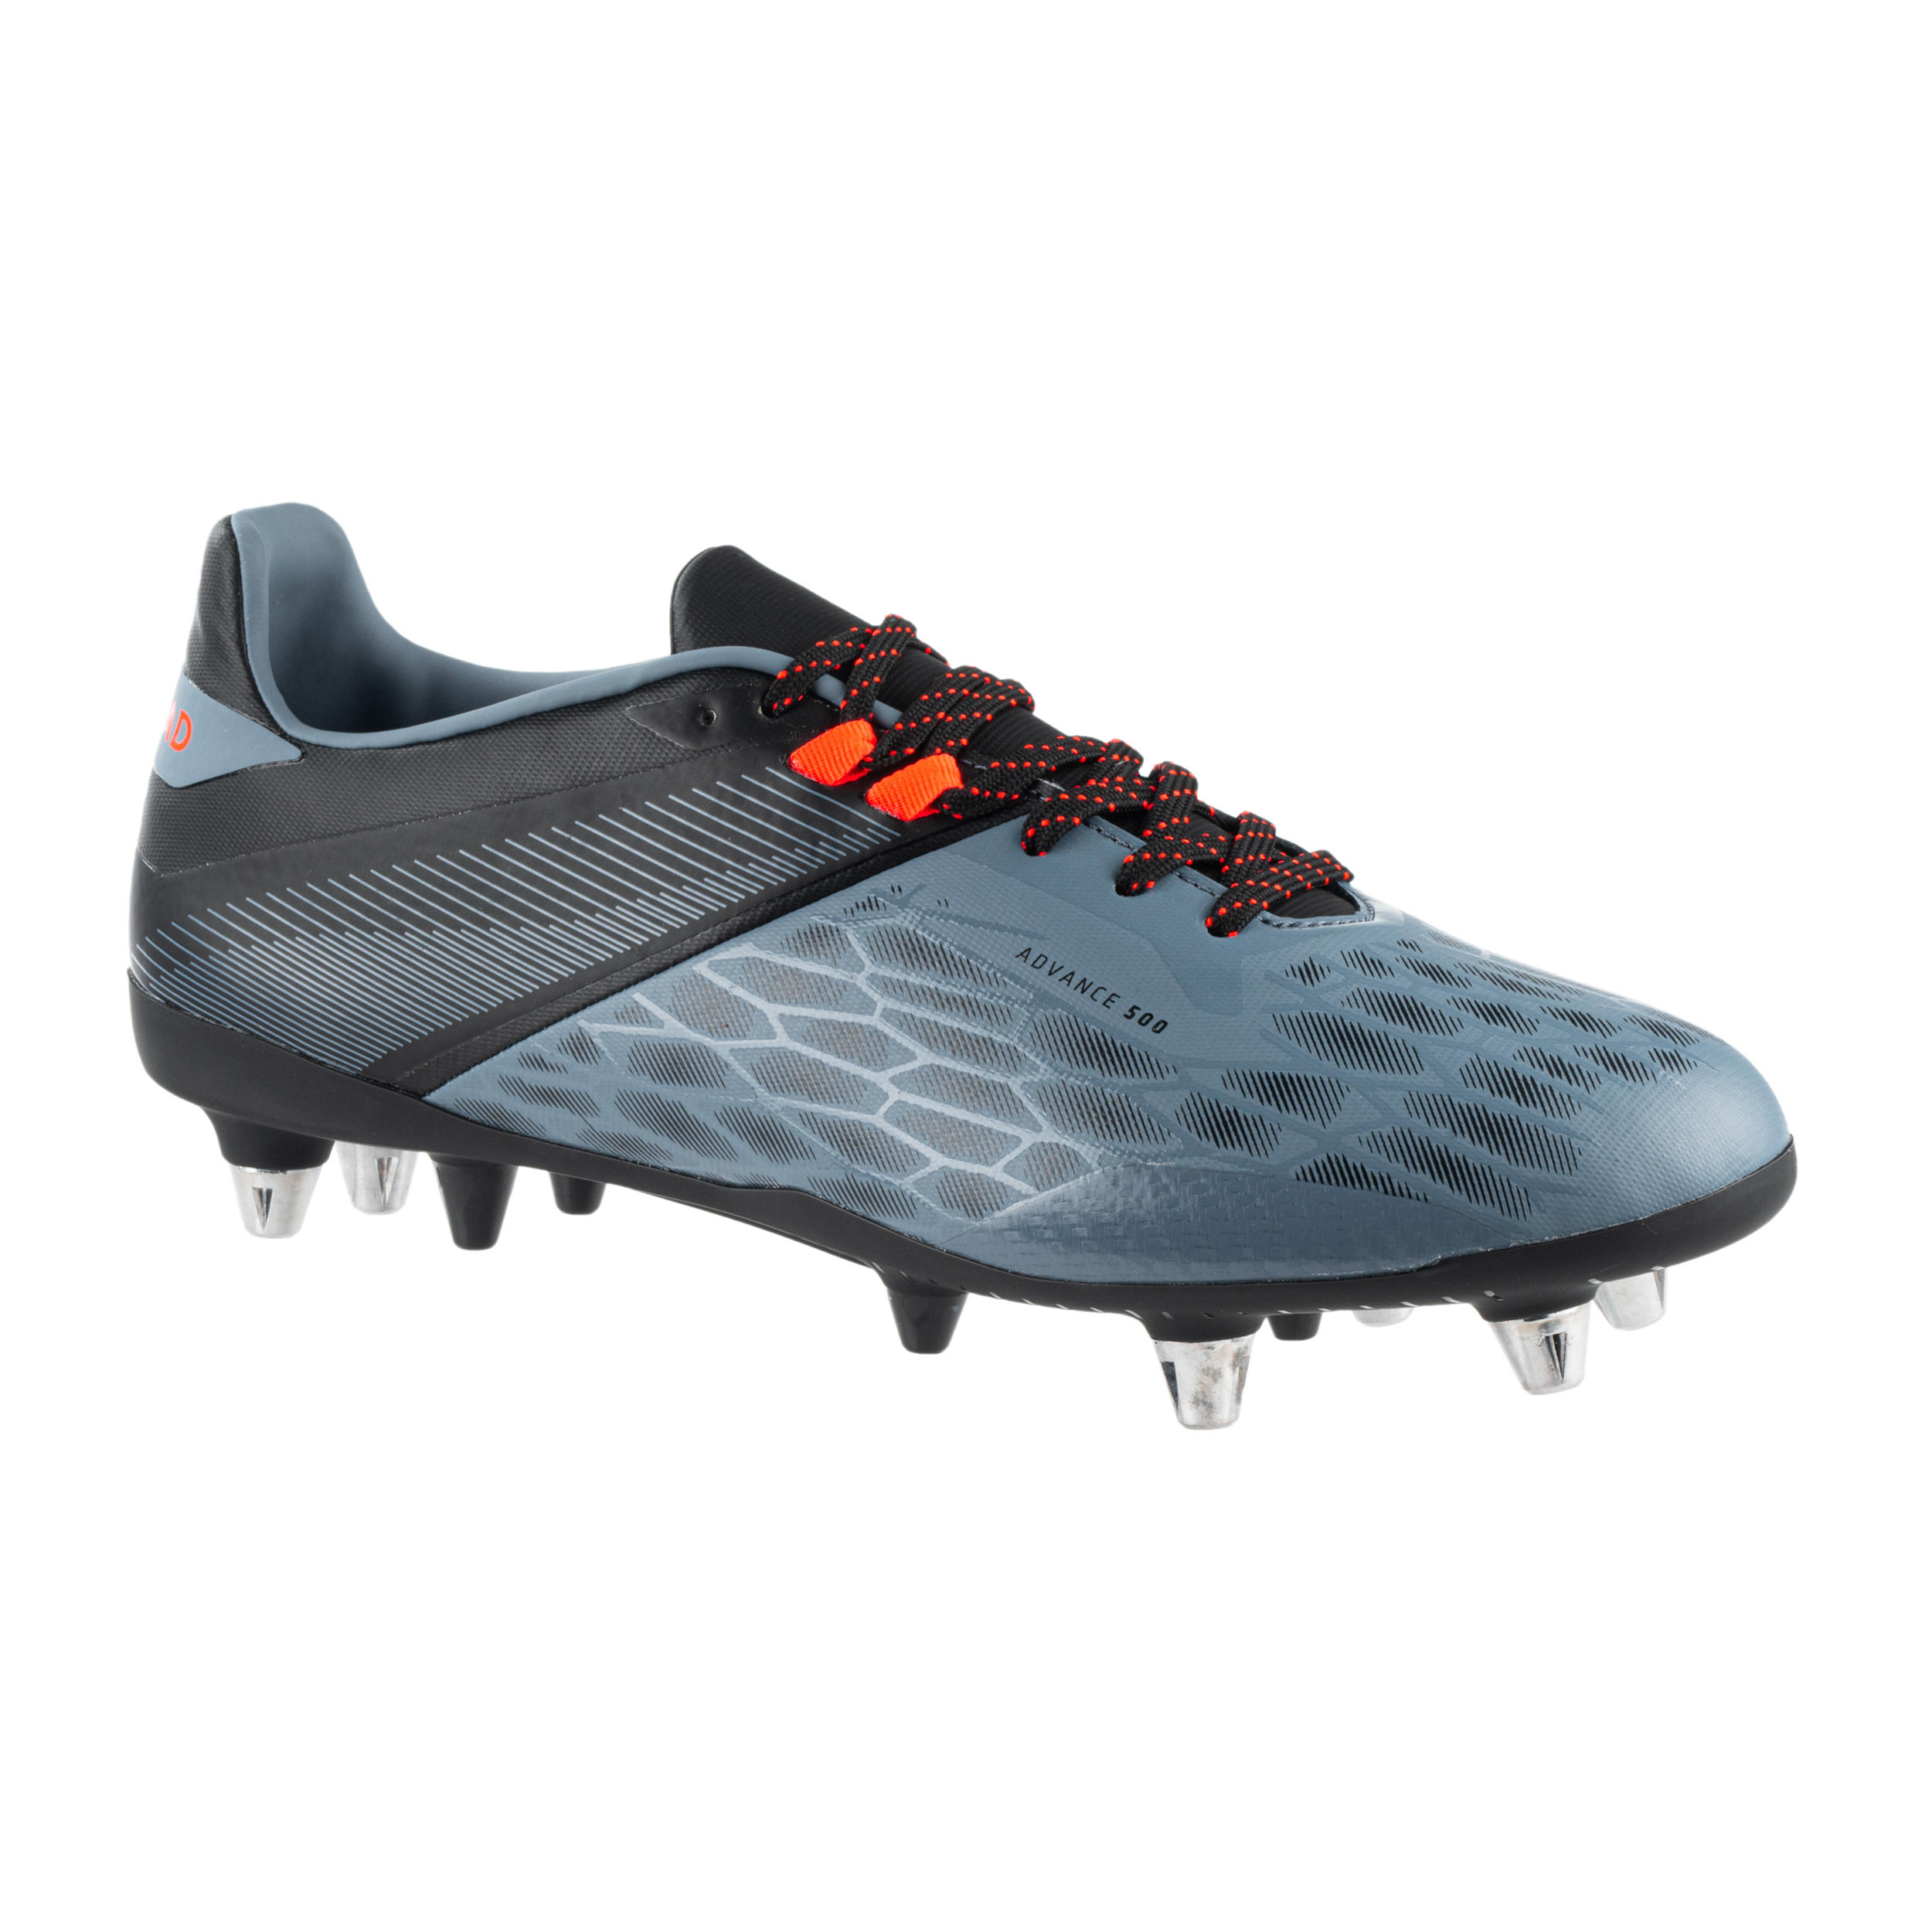 Neuf Crampons rugby Tremblay Crampon alu 18mm coniques Gris 45190 